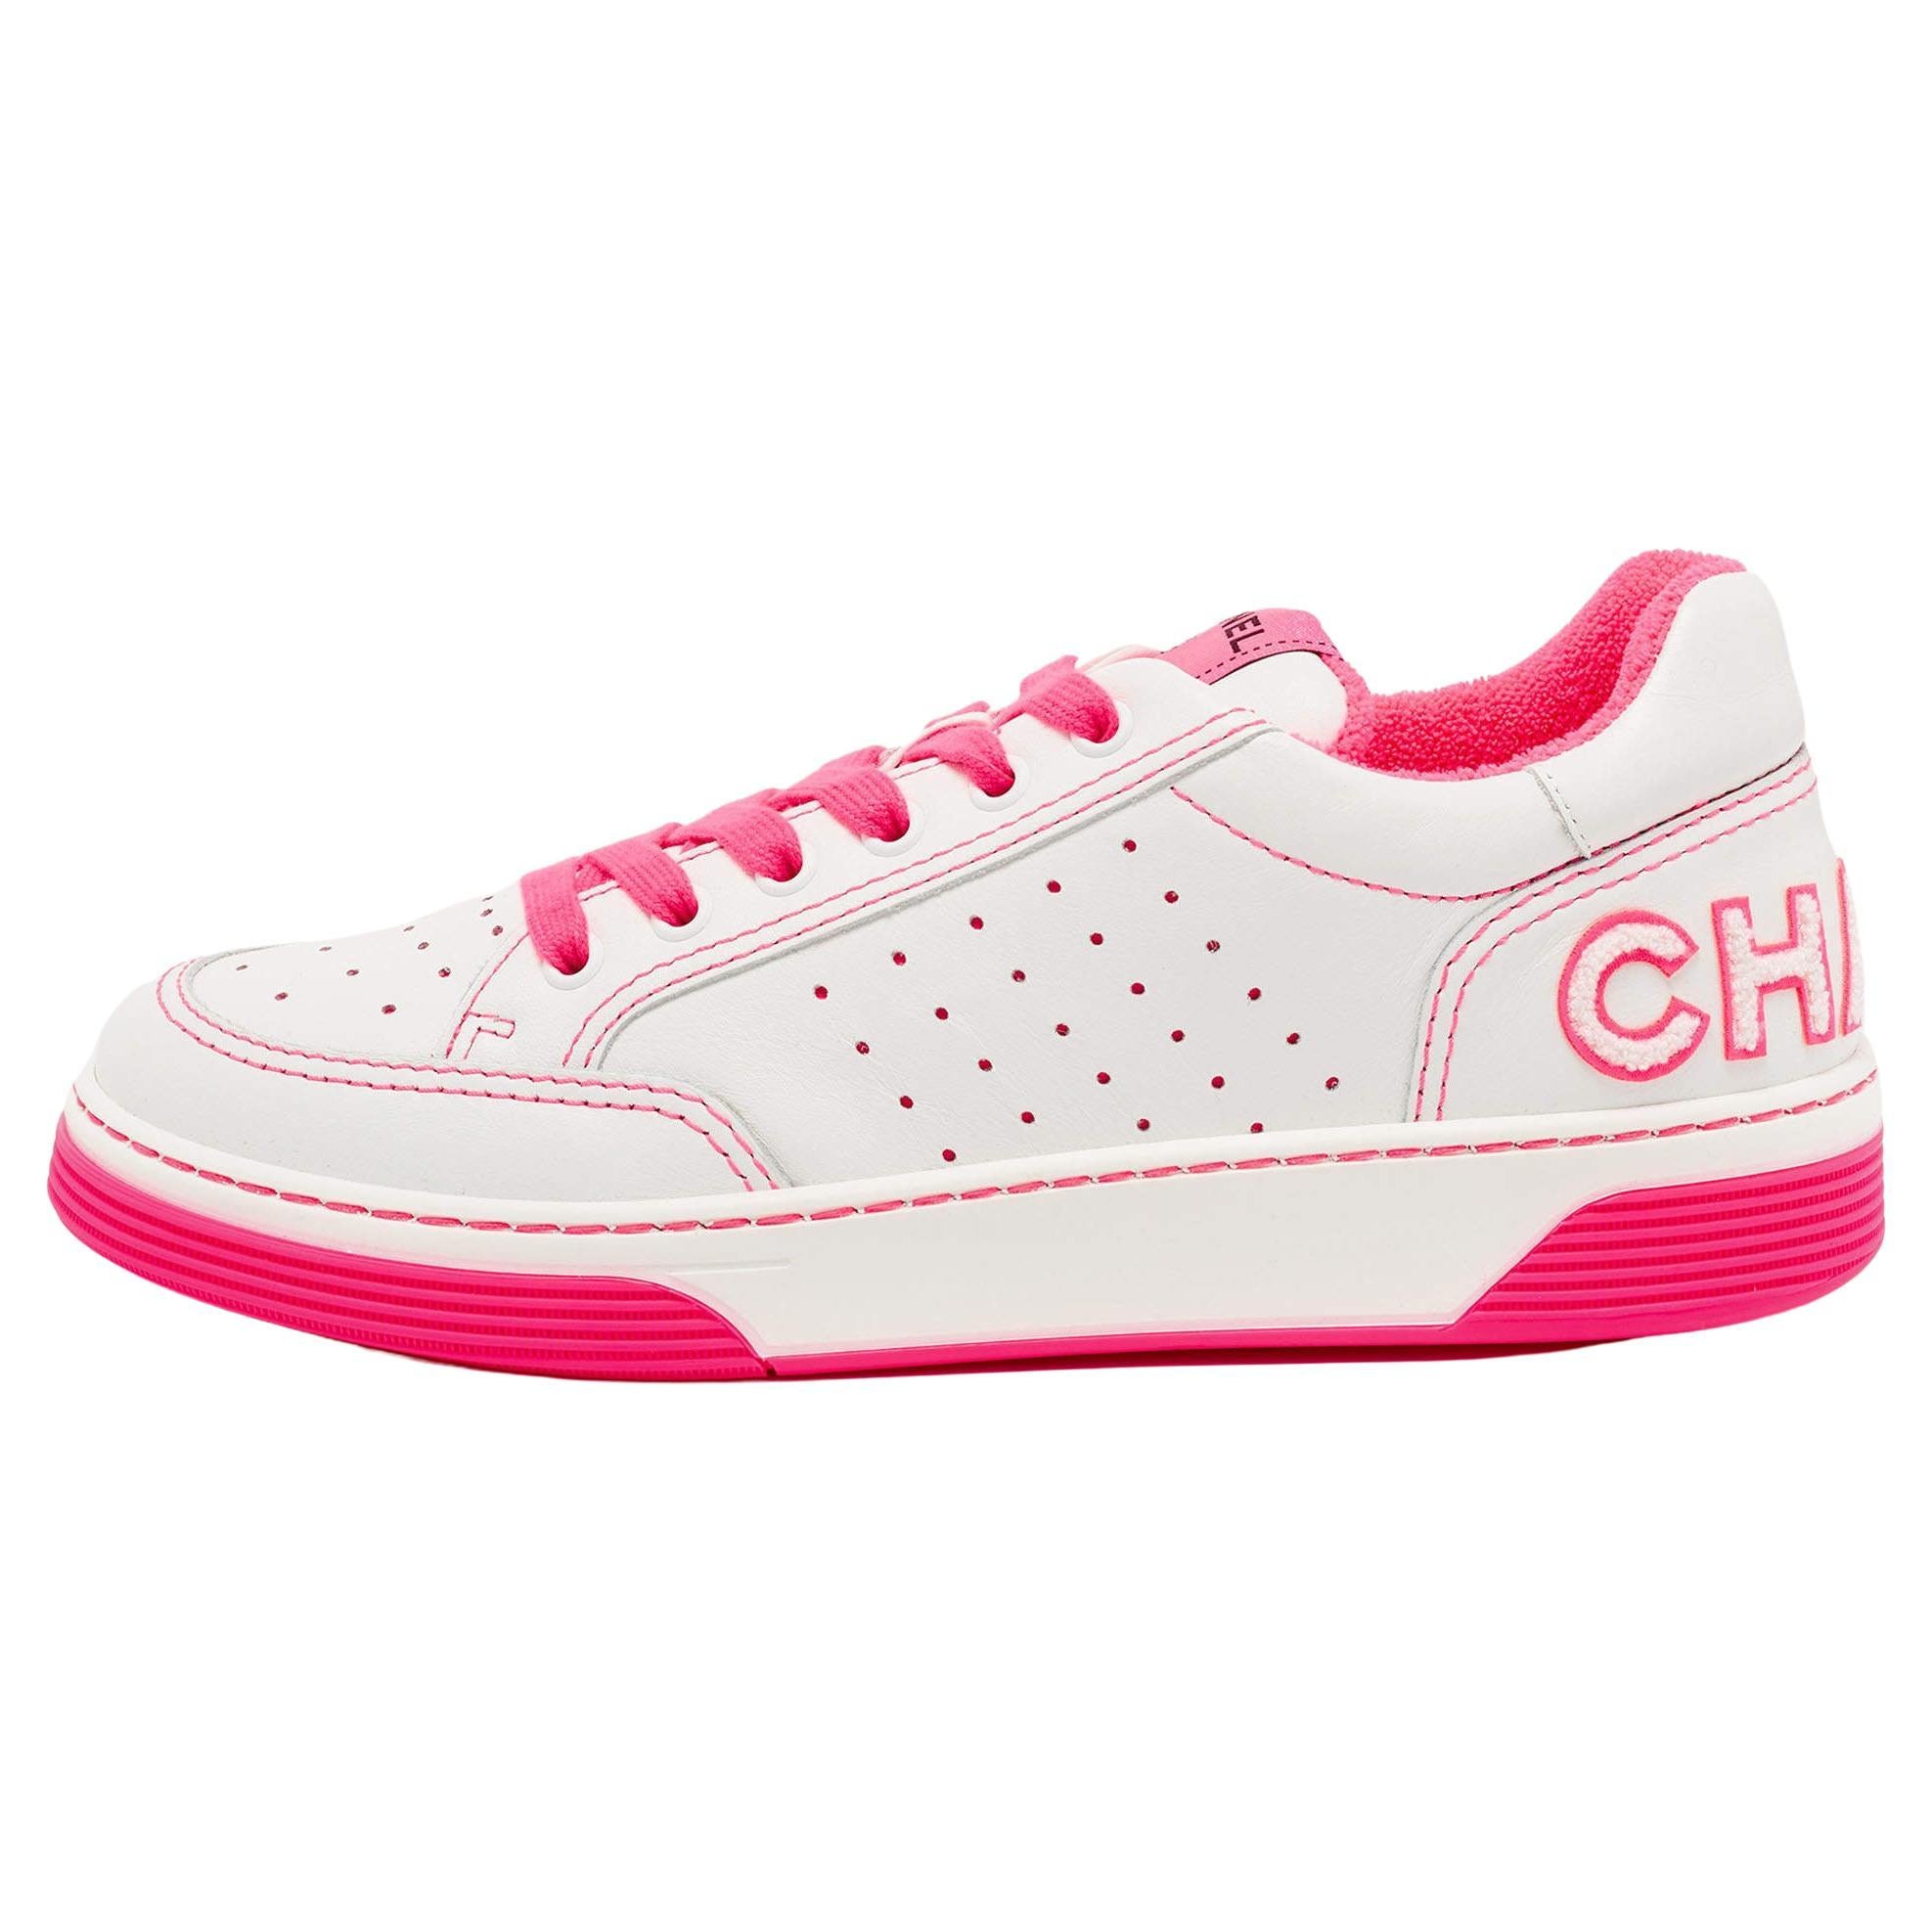 Chanel White/Pink Leather 22P Trainer Sneakers Size 39.5